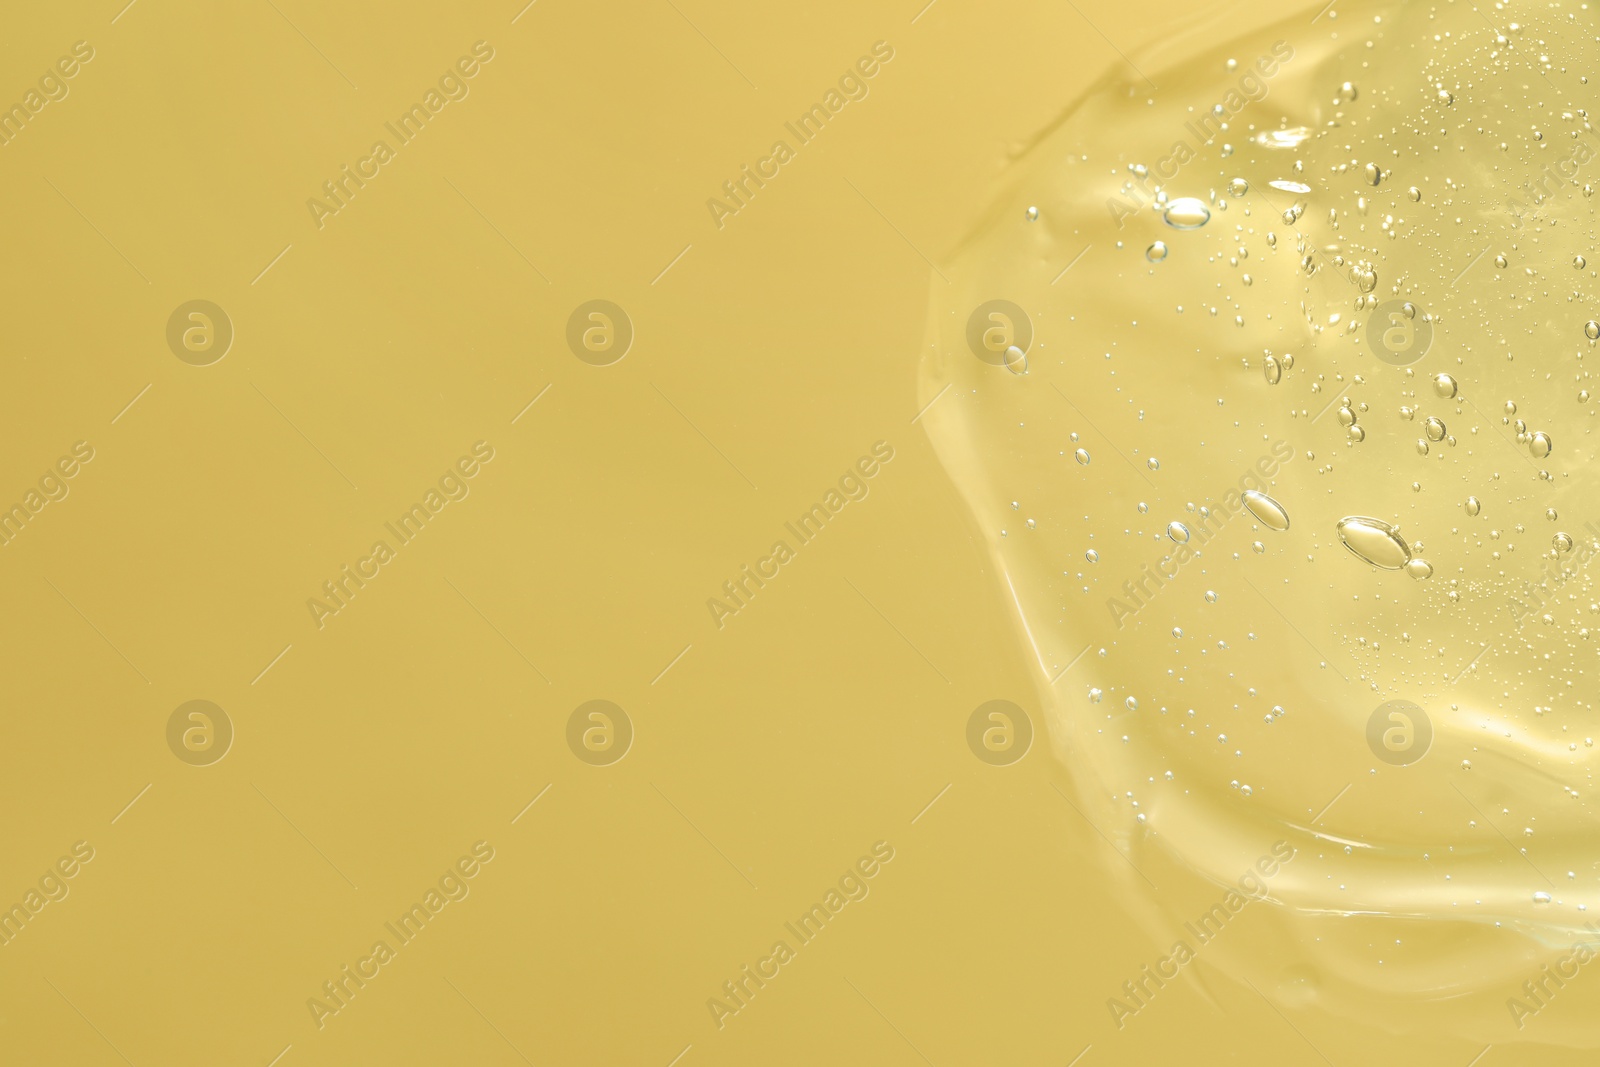 Photo of Transparent cleansing gel on pale yellow background, top view with space for text. Cosmetic product